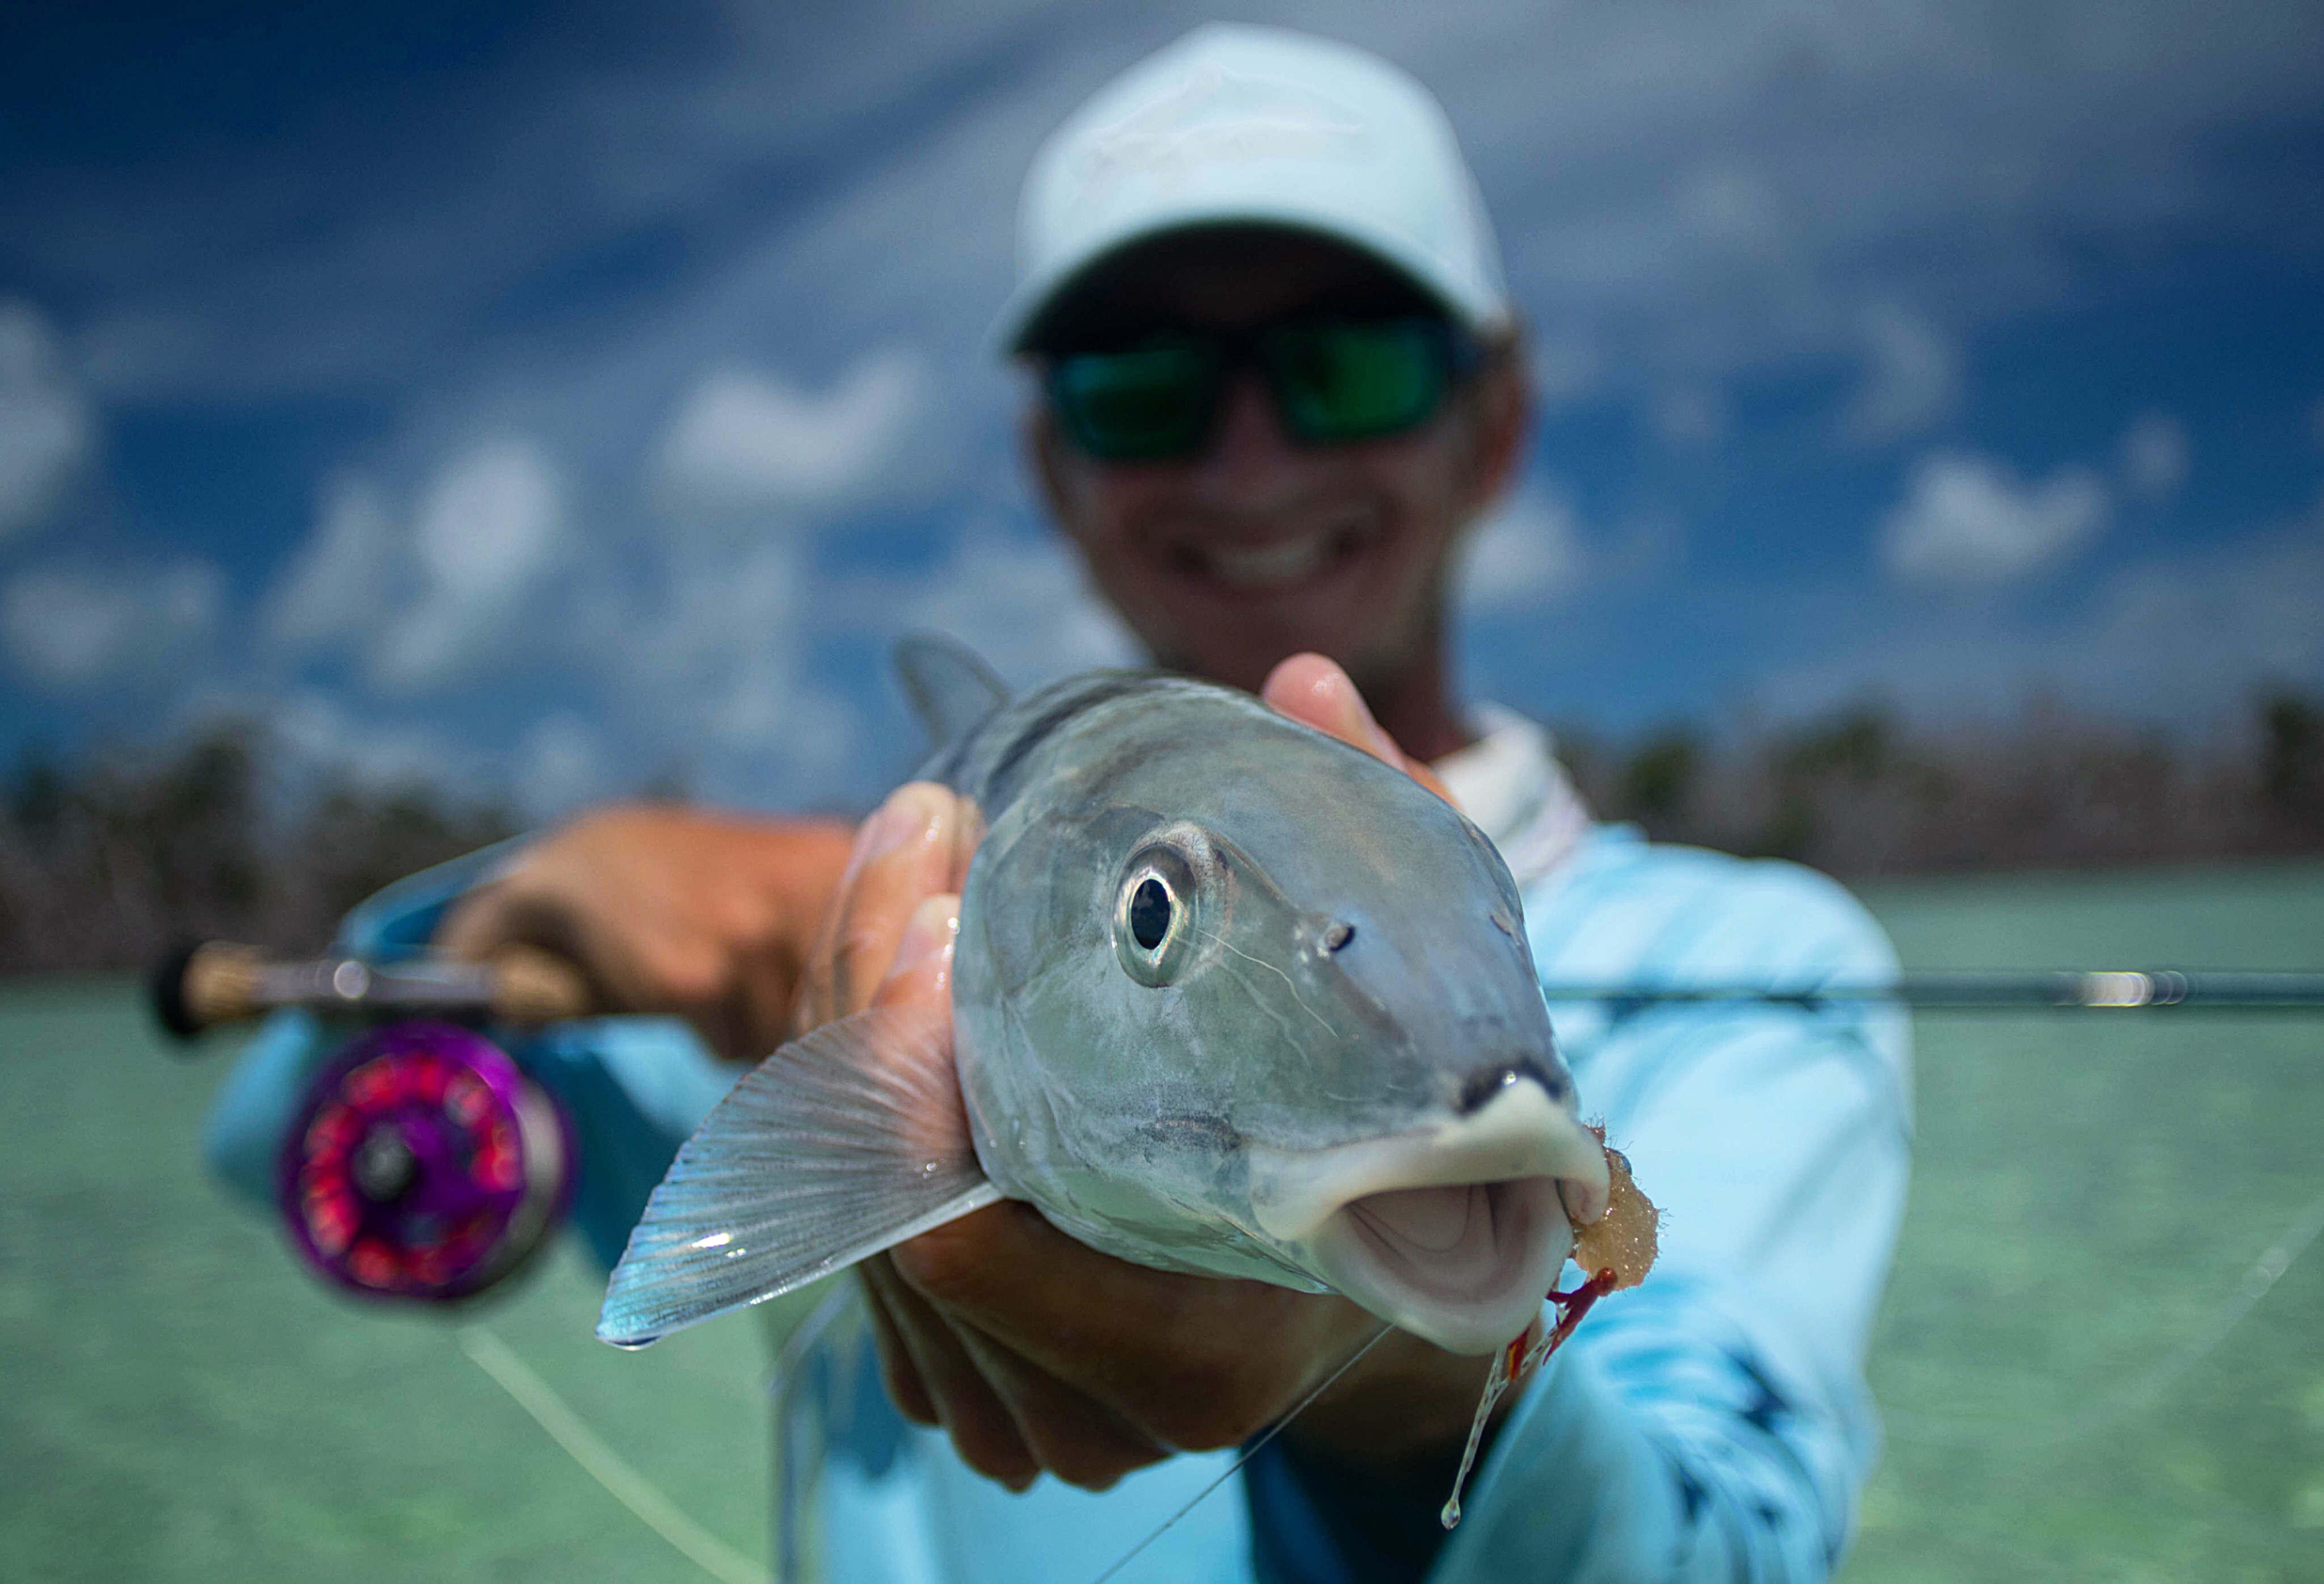 Catching bonefish on fly is a blast and the Florida Keys are one of the best places in the world to do it!